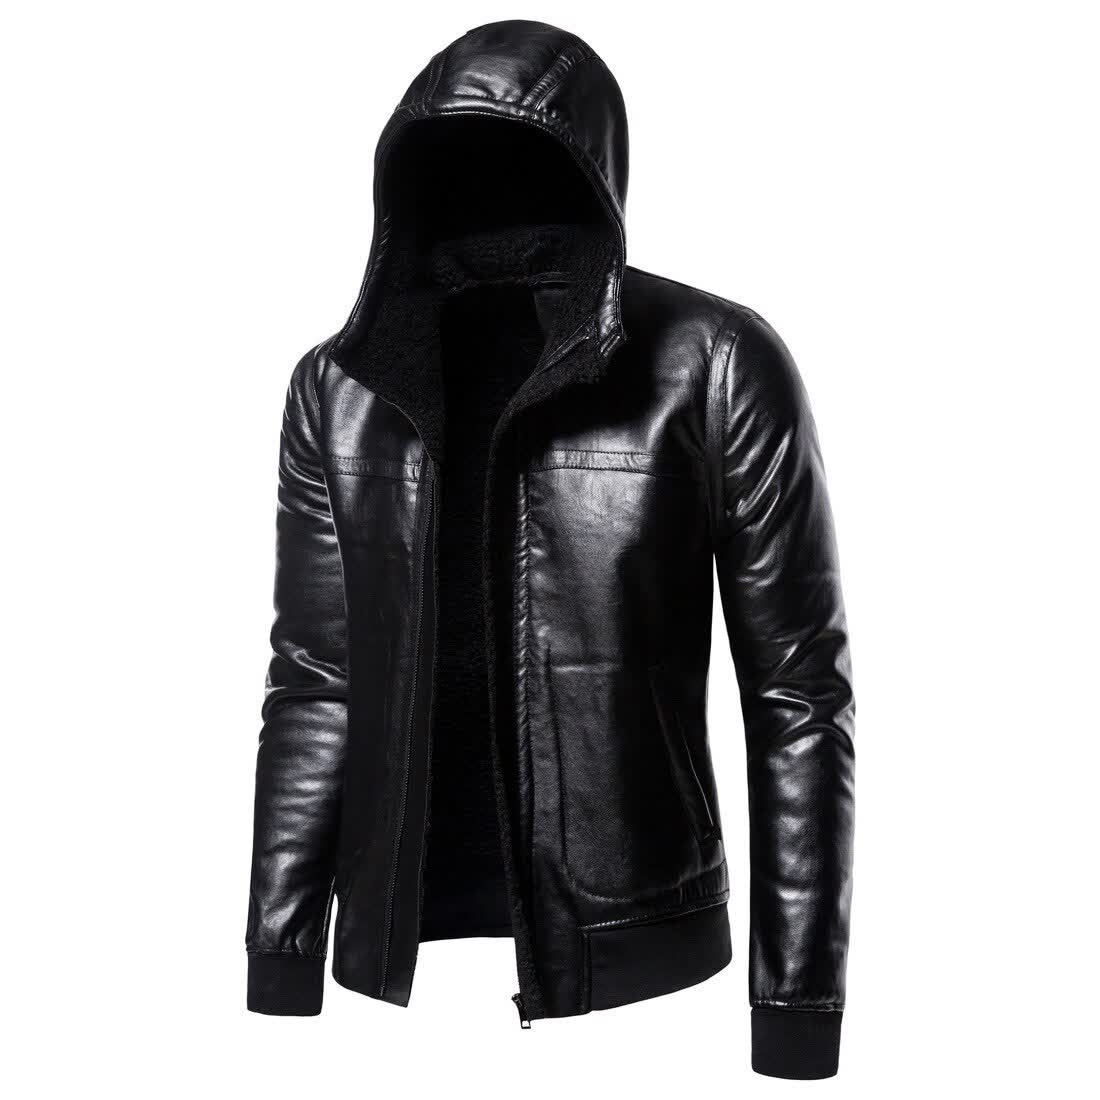 Men Winter Hooded Leather Jackets Thicker Warm PU Leather Jackets and Coats Good Quality Men Slim Fit Black Lether Jackets 